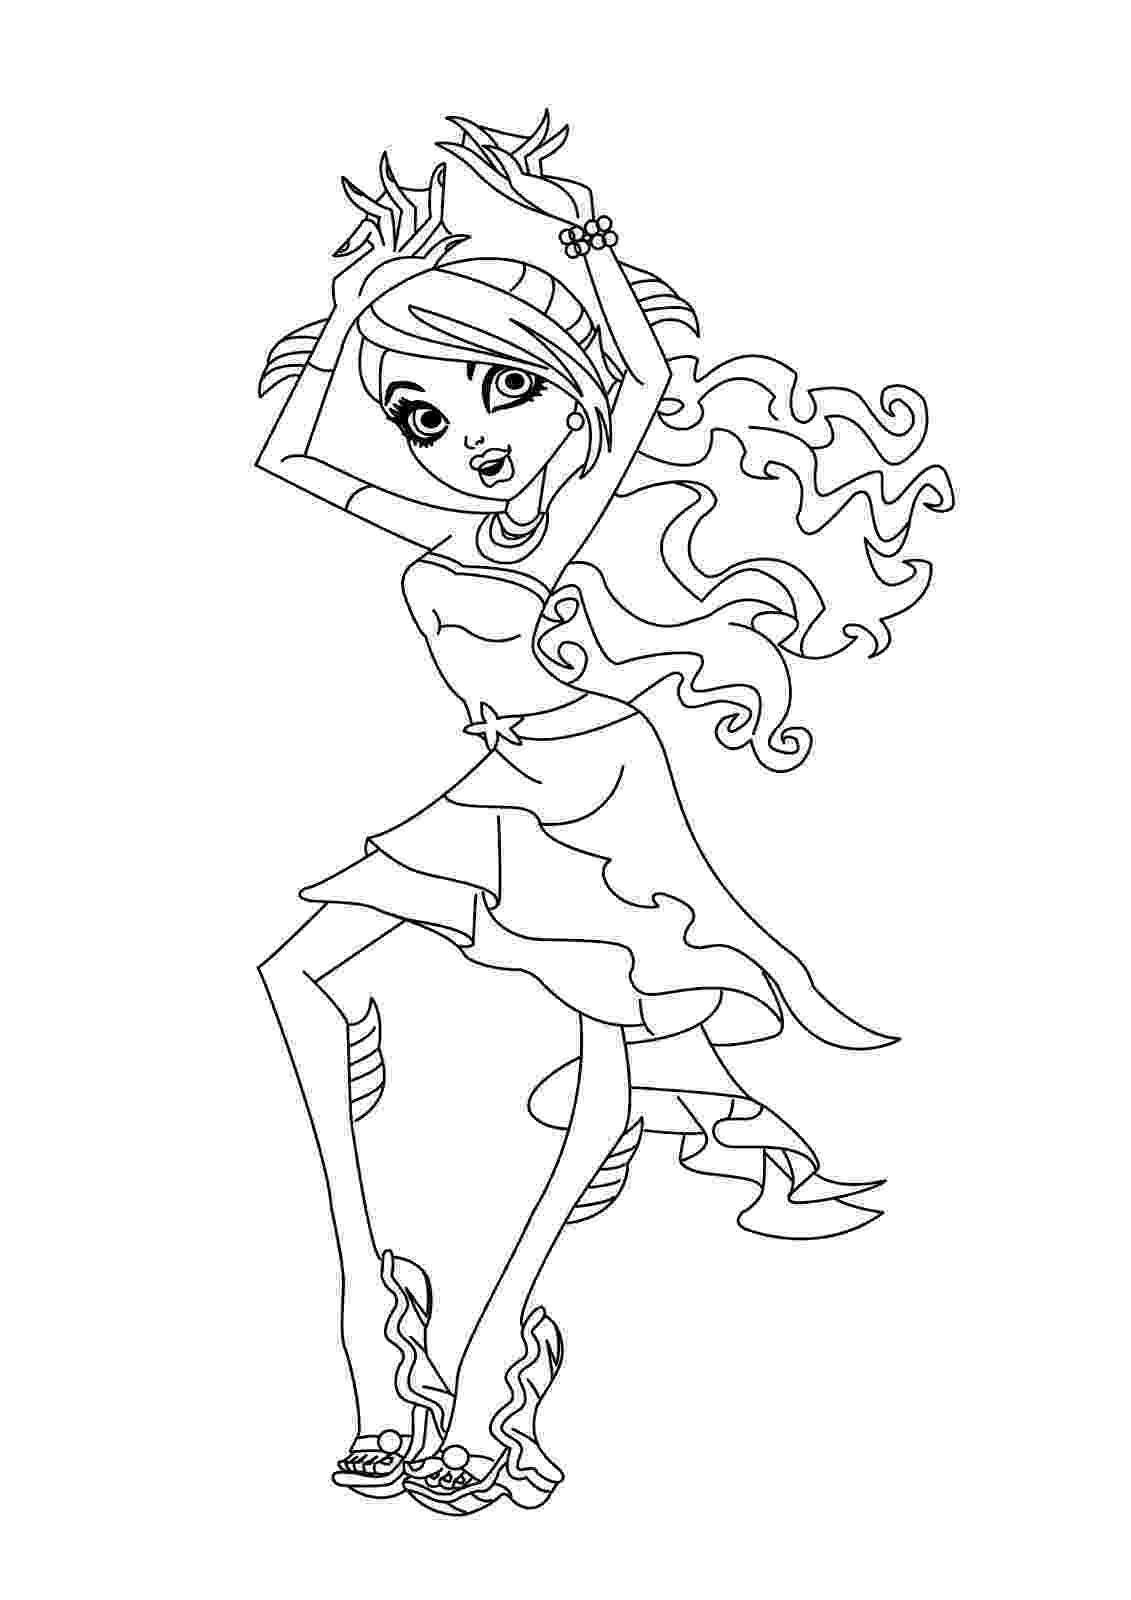 monster high coloring pages for free monster high coloring pages getcoloringpagescom pages monster for free coloring high 